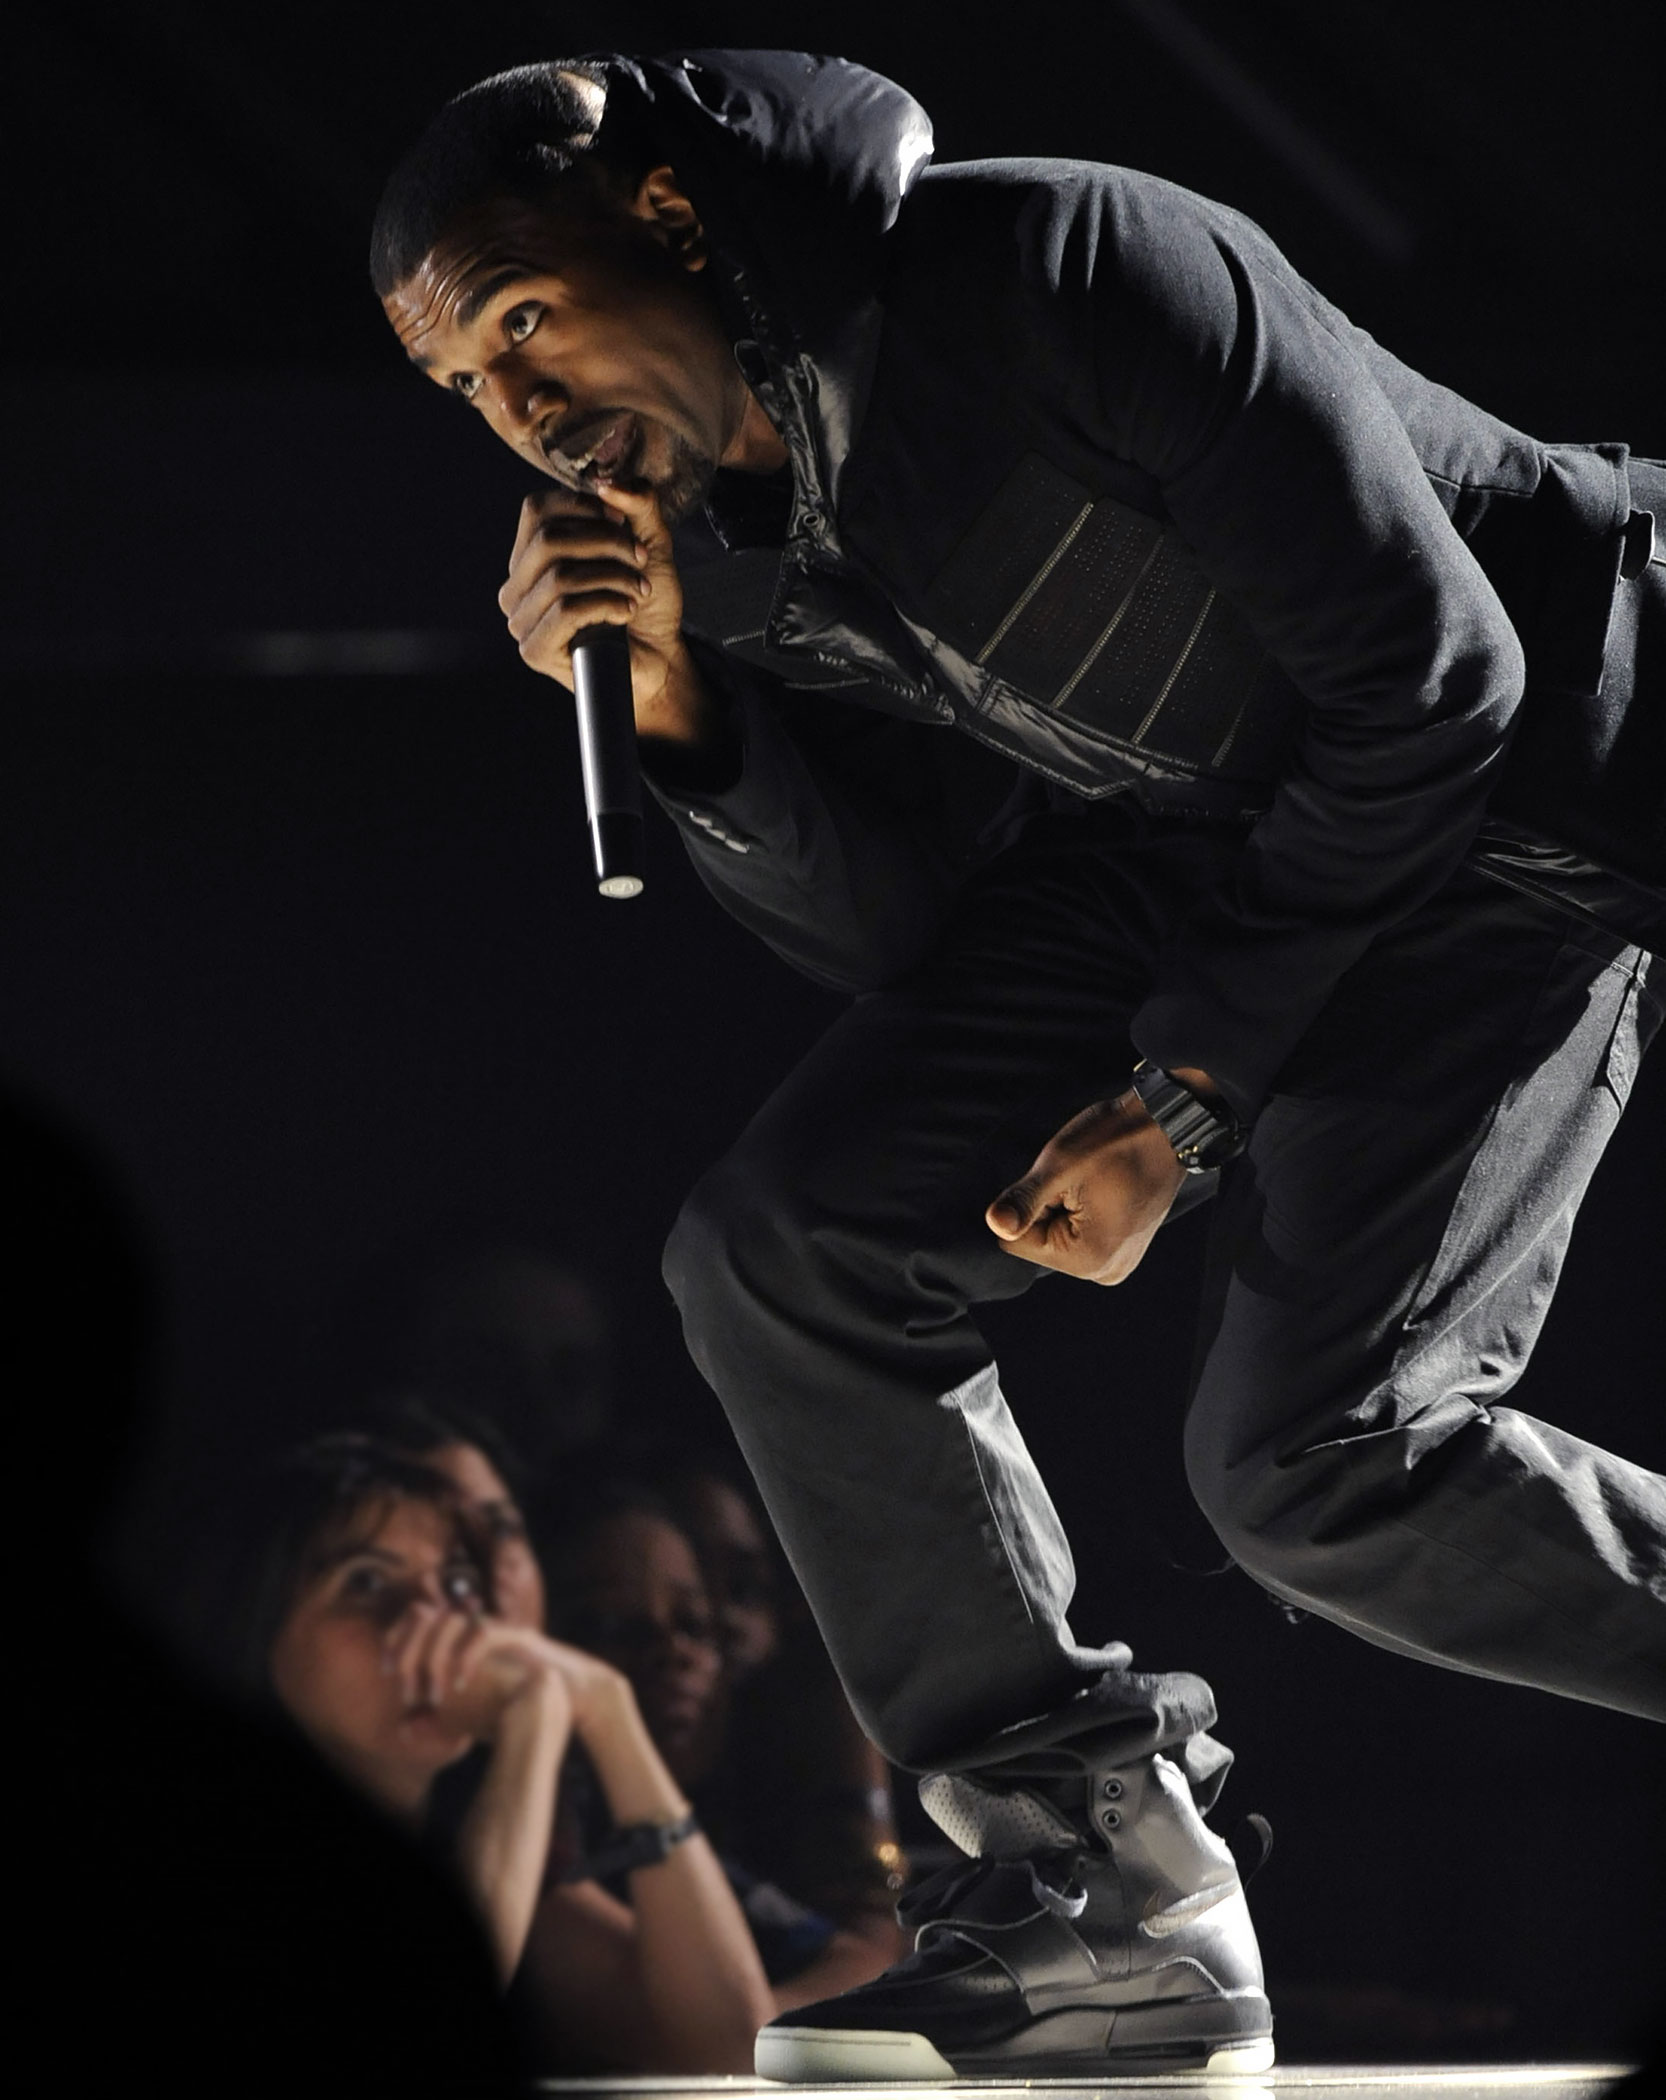 Kanye West Grammy-Worn Nike Air Yeezy Sneakers Sell for a Record